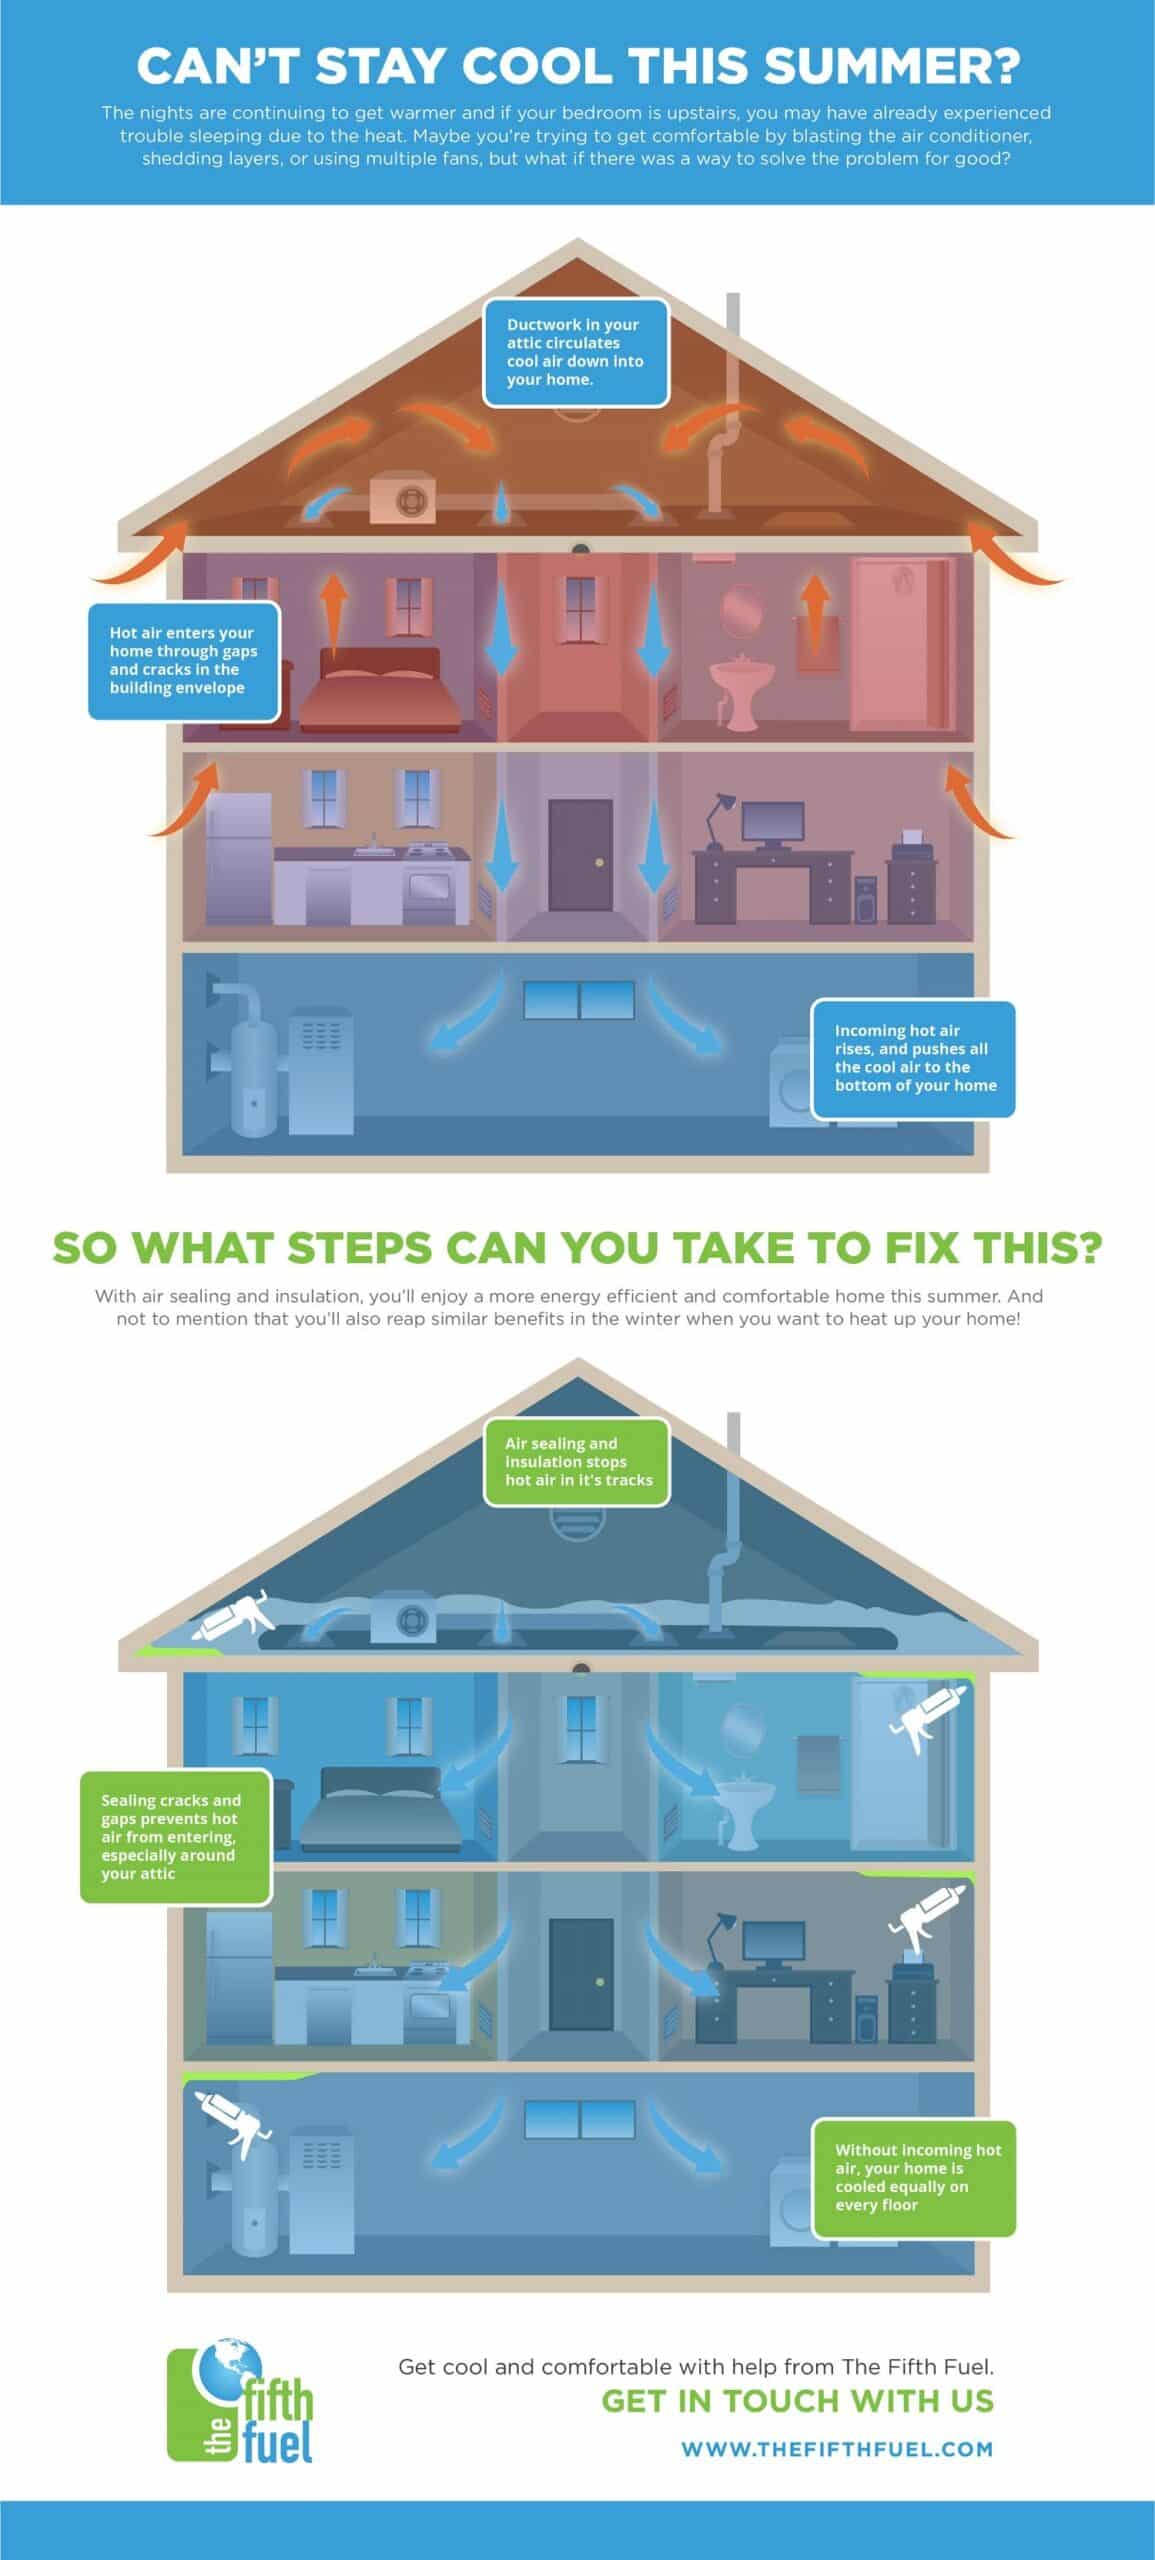 Air leaks infographic showing the various parts of the home where air is coming in and how to prevent it. Created by The Fifth Fuel in Manassas, VA